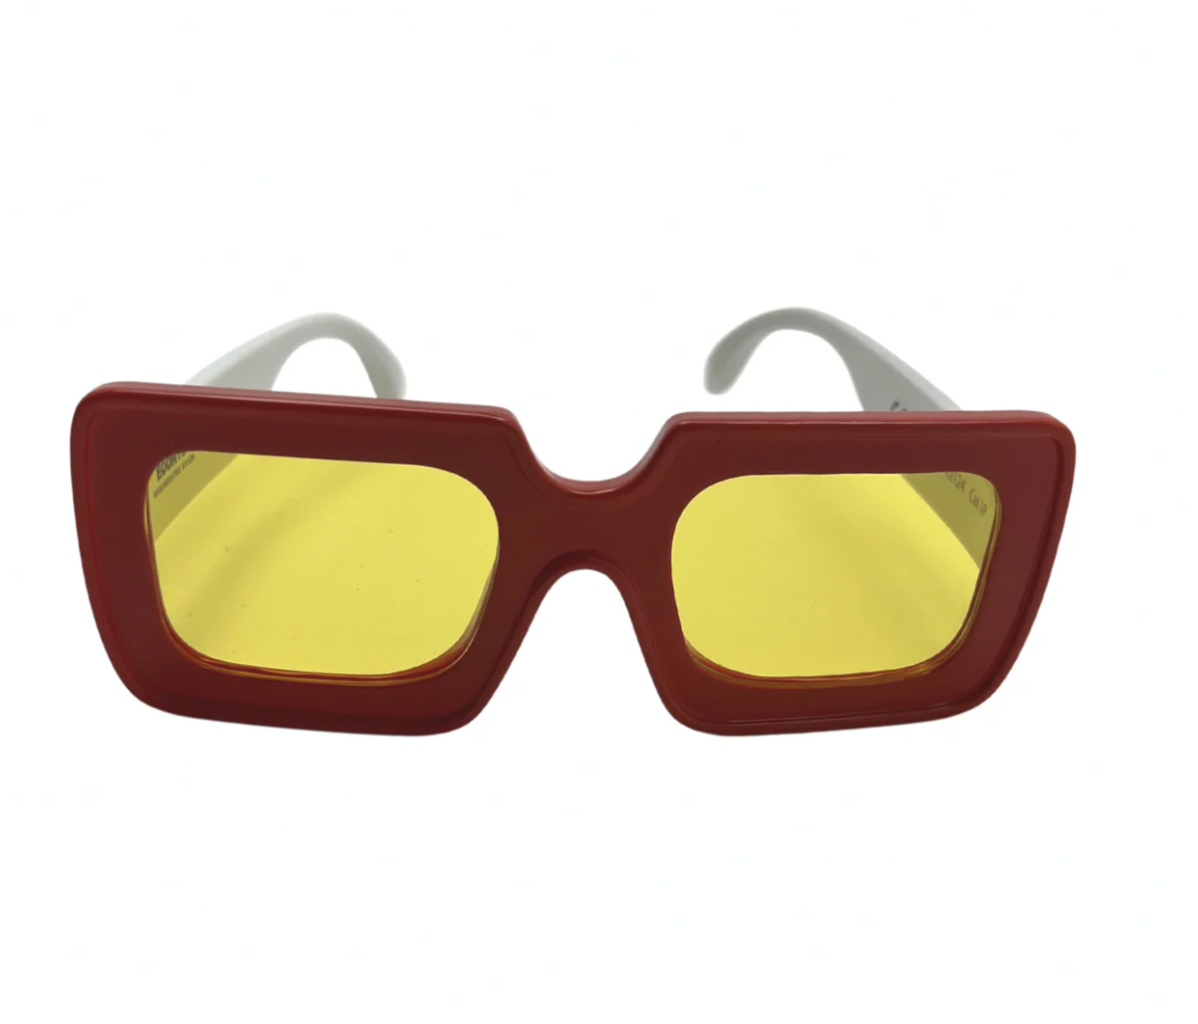 THE ANIMALS OBSERVATORY - Yellow lens sunglasses